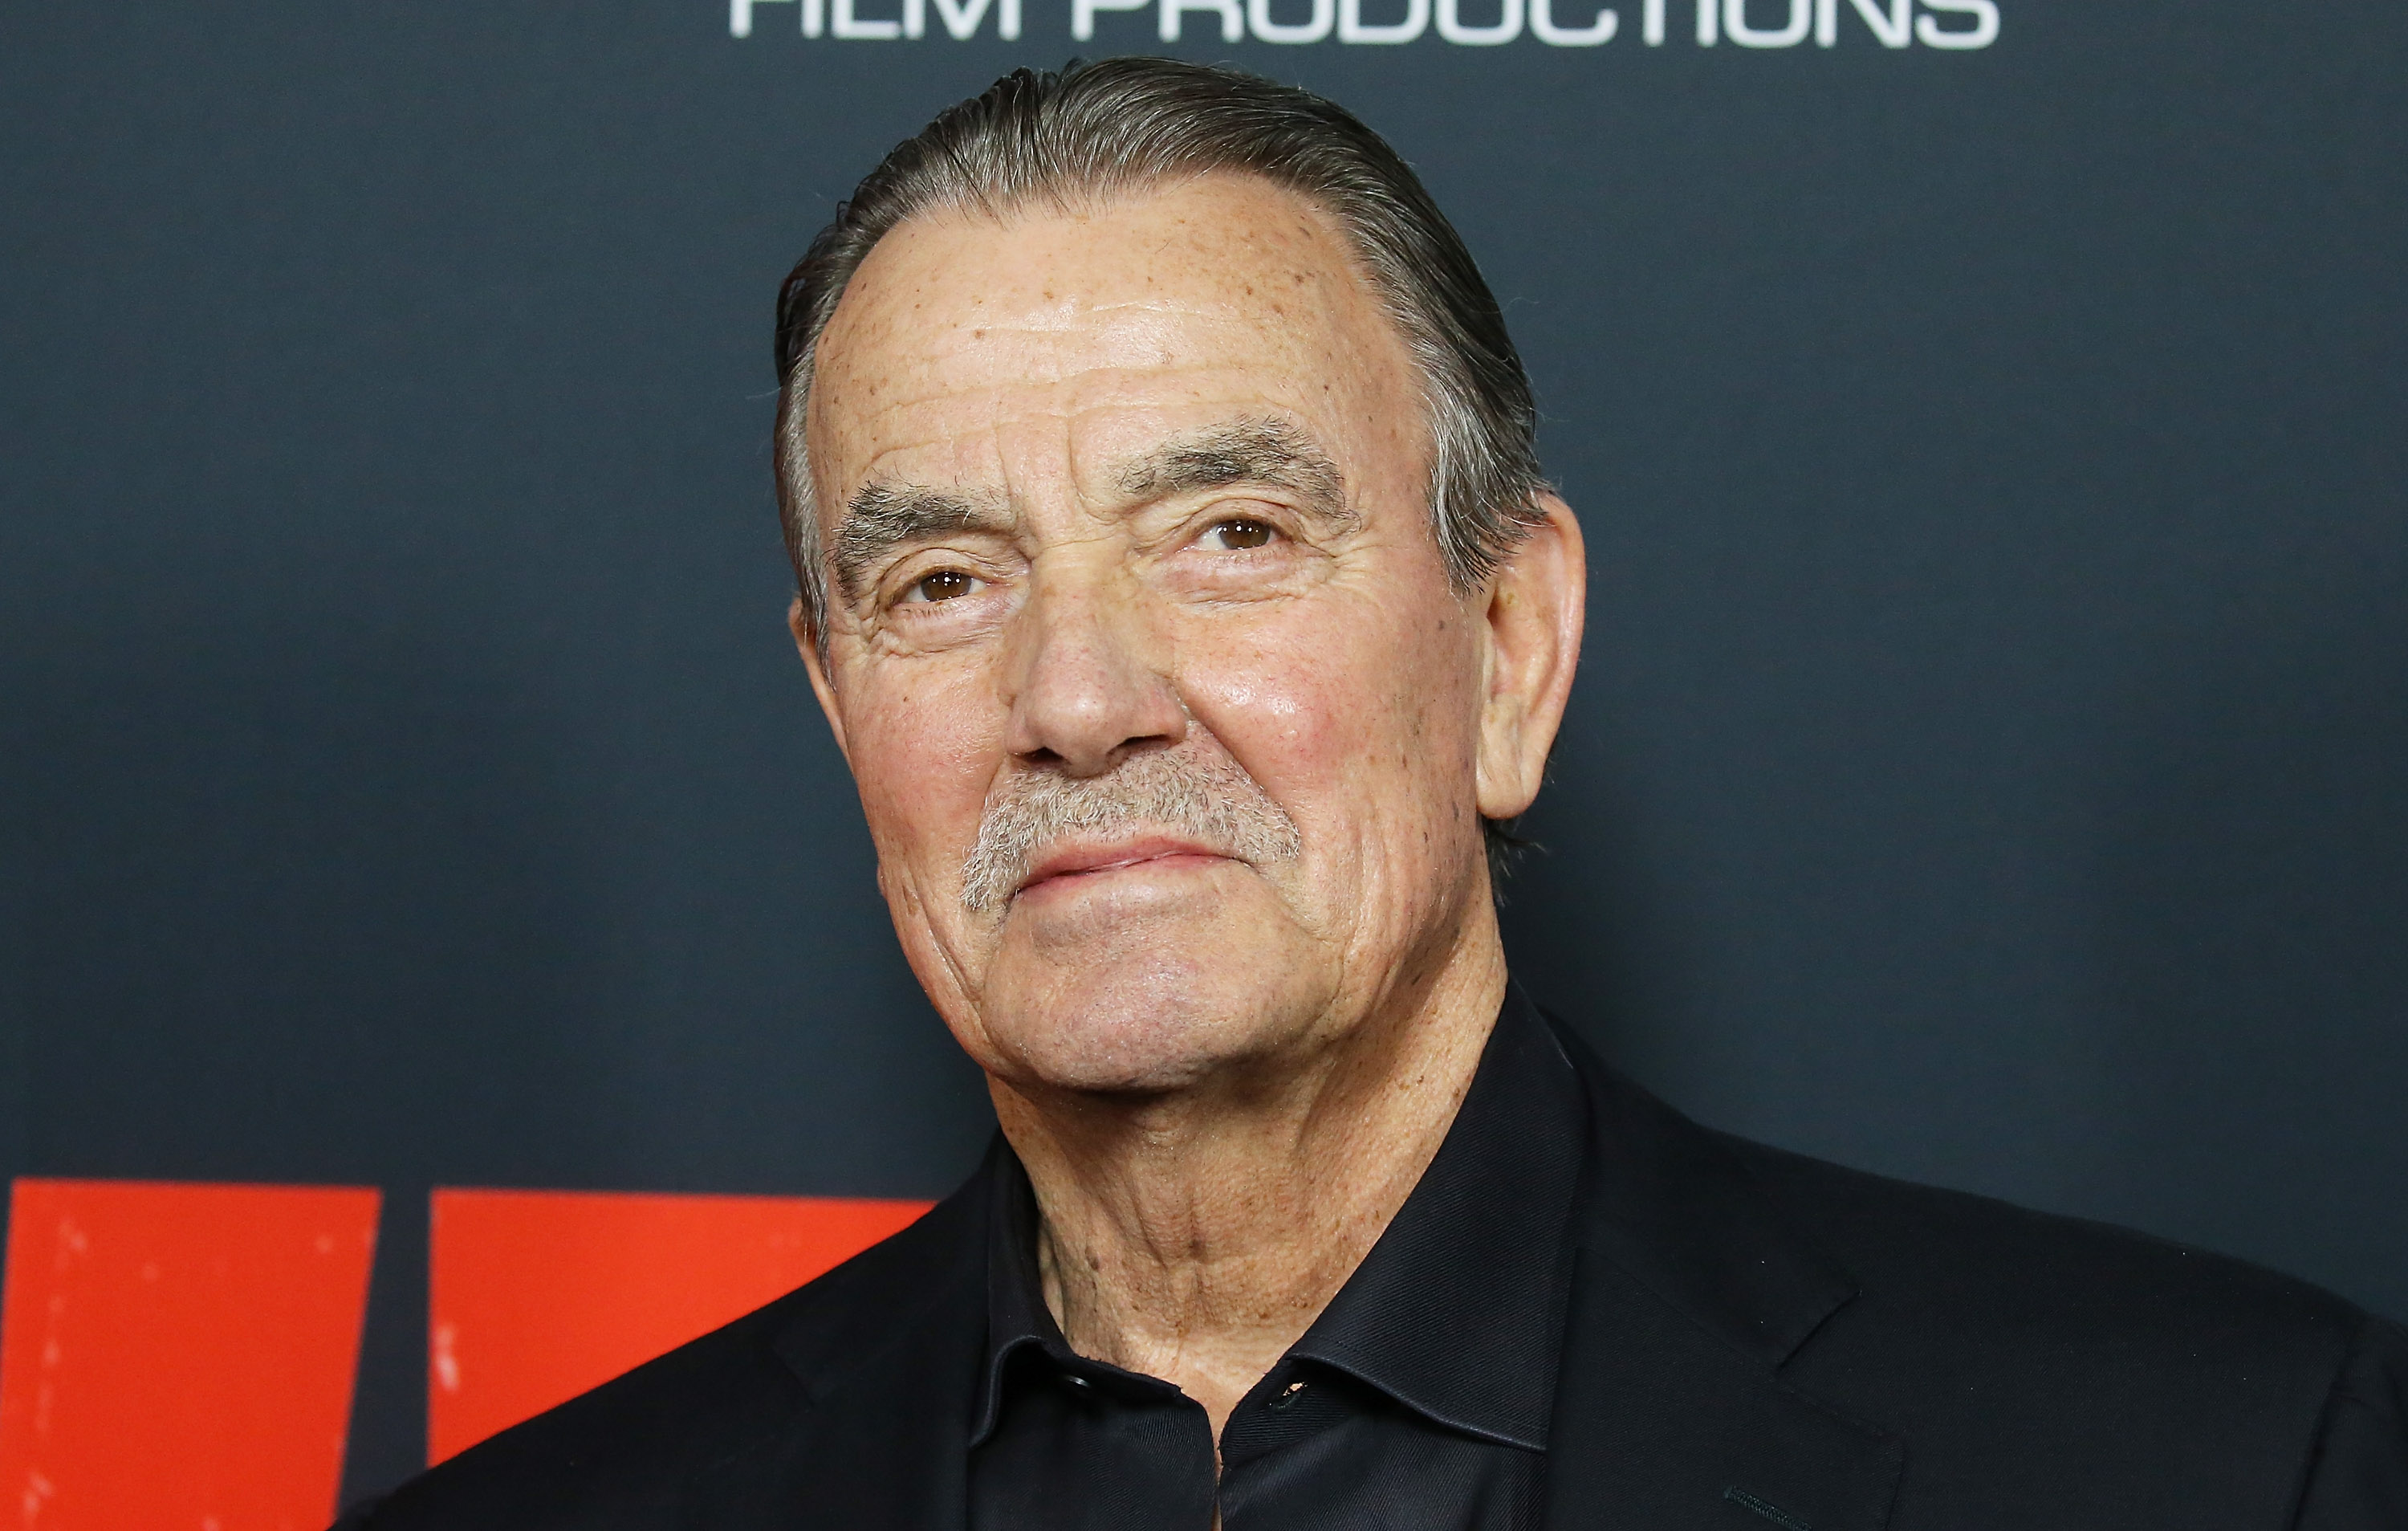 Eric Braeden arrives for the Premiere Of STX Films' "Den Of Thieves" held at Regal LA Live Stadium 14 on January 17, 2018, in Los Angeles, California. | Source: Getty Images